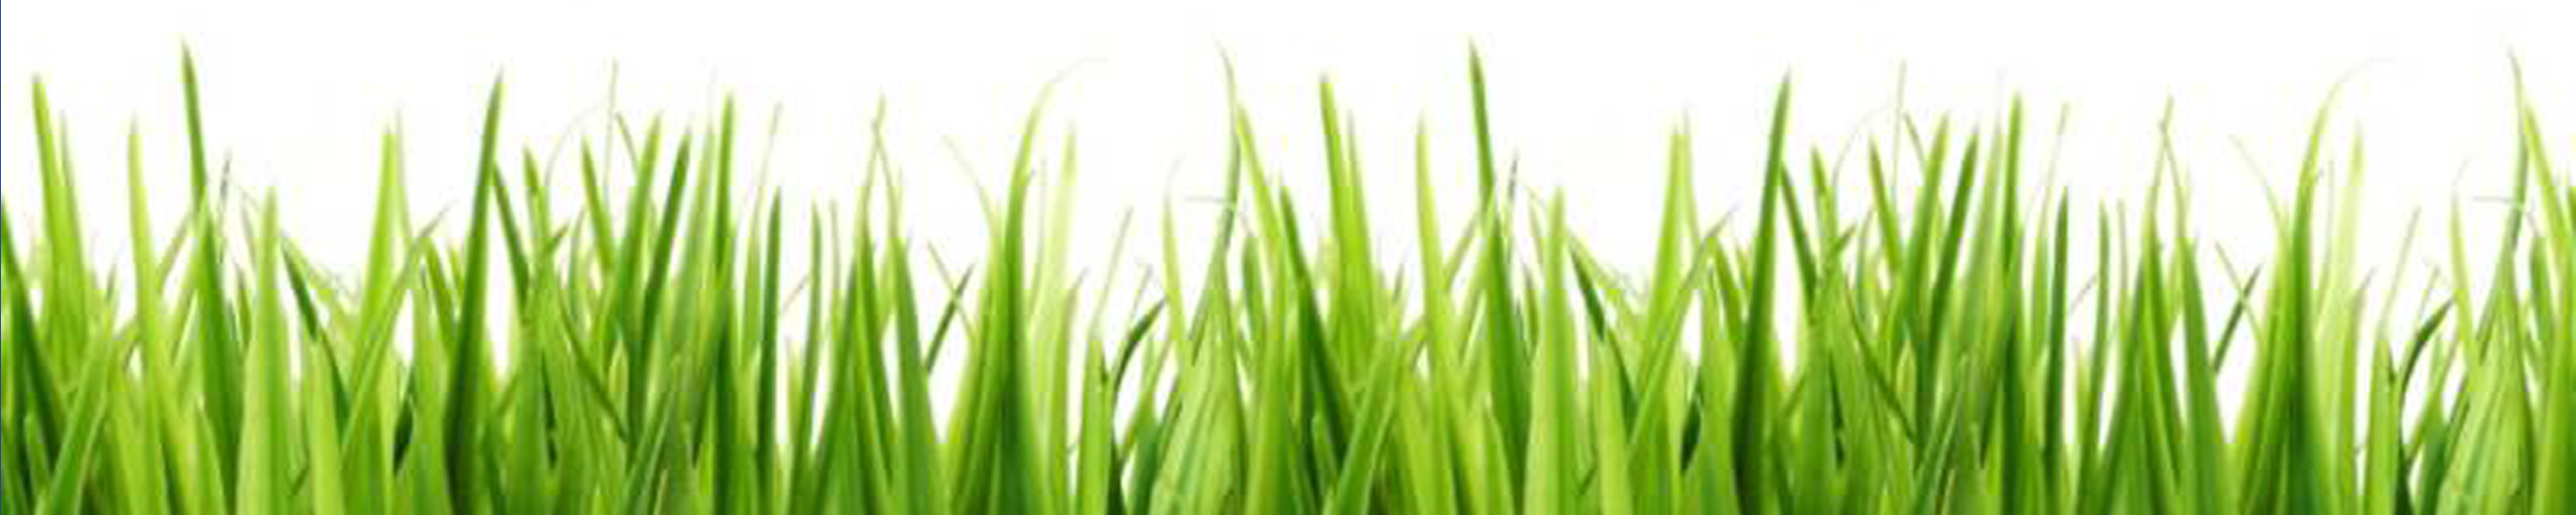 free grass pictures clip art - photo #17